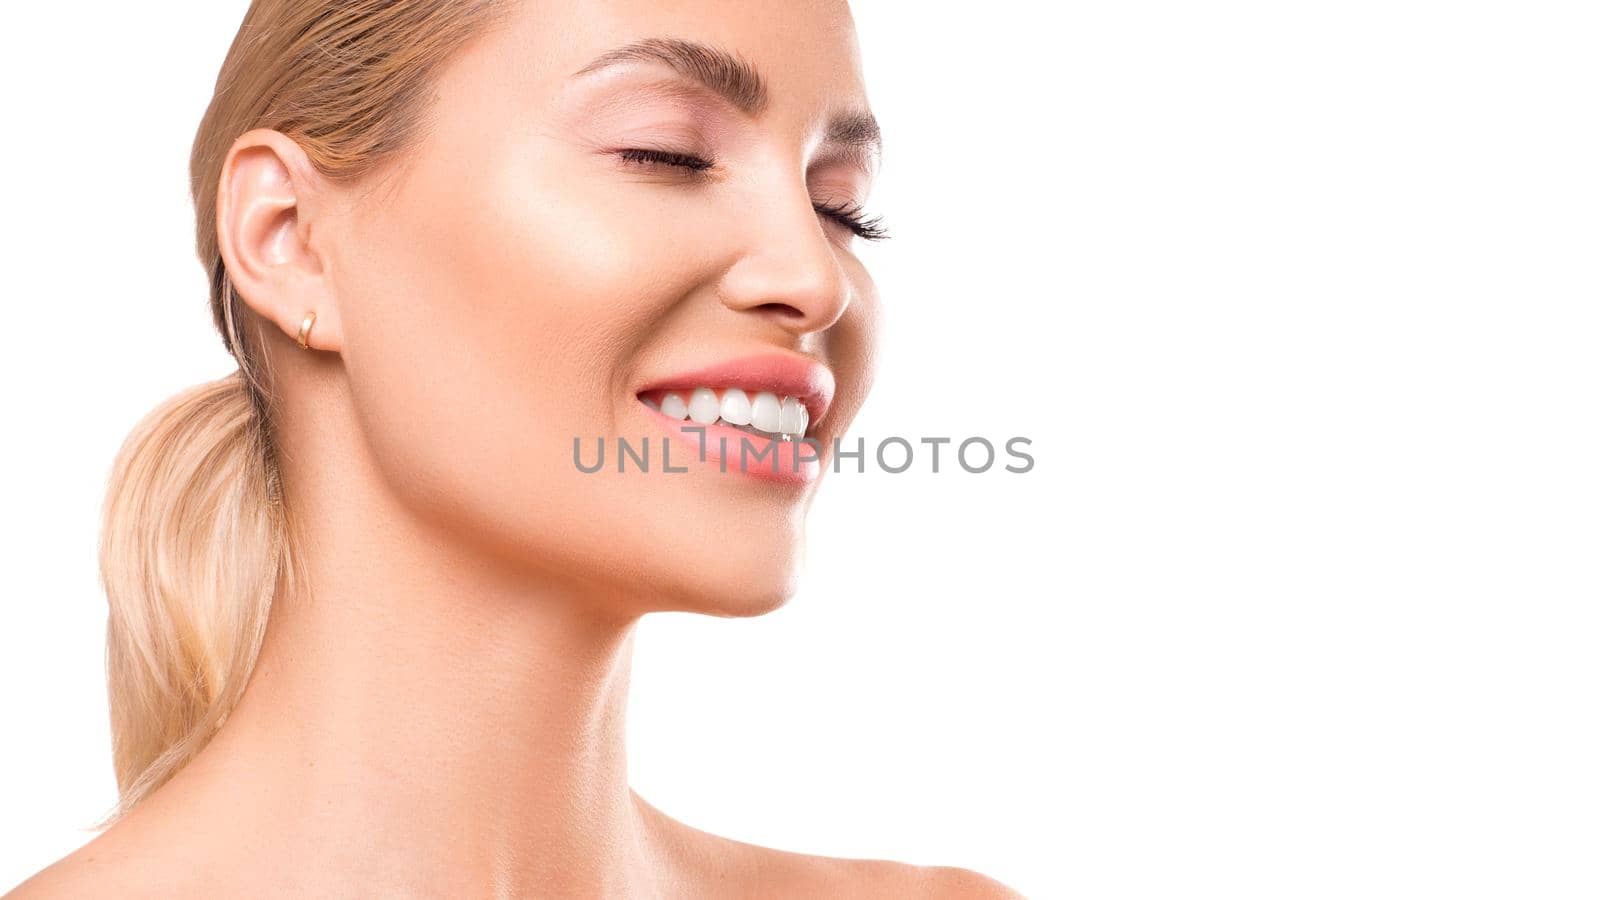 Portrait of a smiling young woman with closed eyes. Skin care concept.